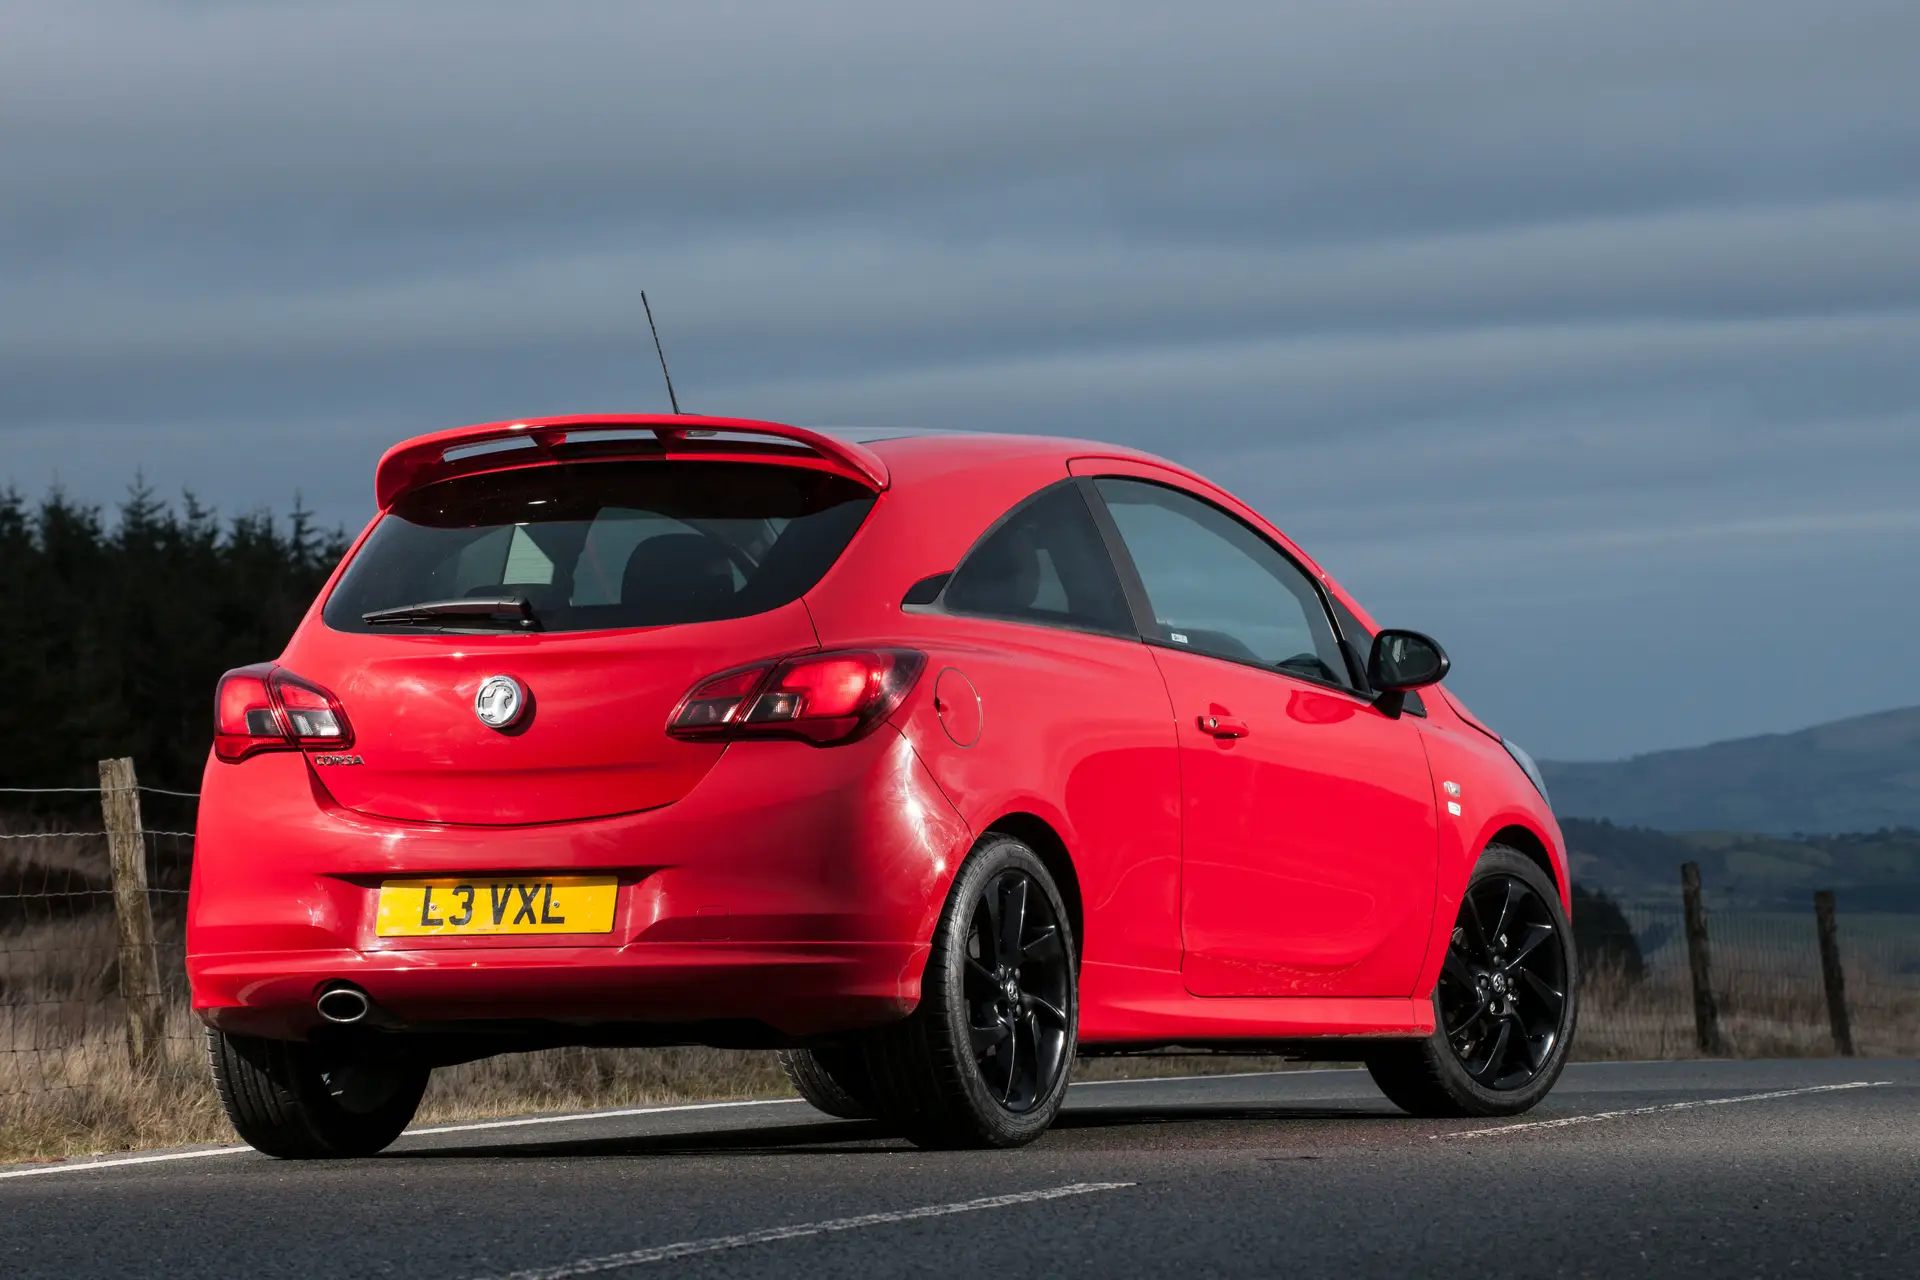 Used Vauxhall Corsa (2014-2019) Review: exterior rear three quarter photo of the Vauxhall Corsa